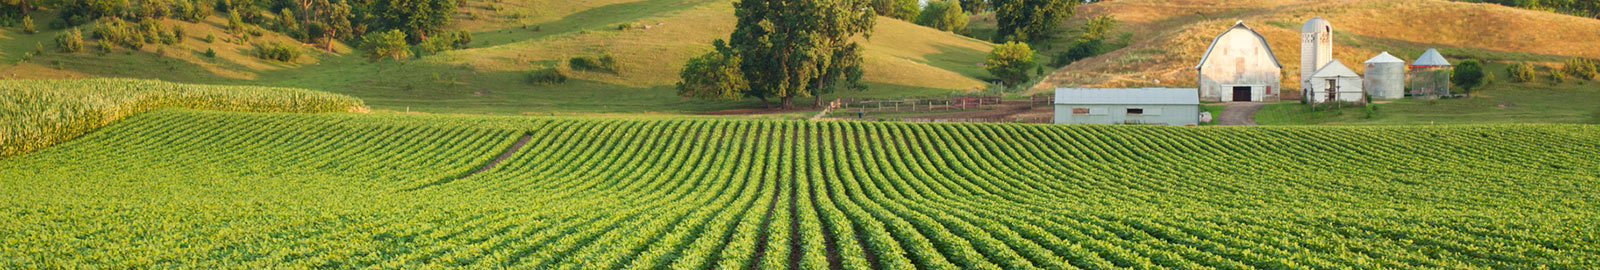 Farm field with rows of crops.